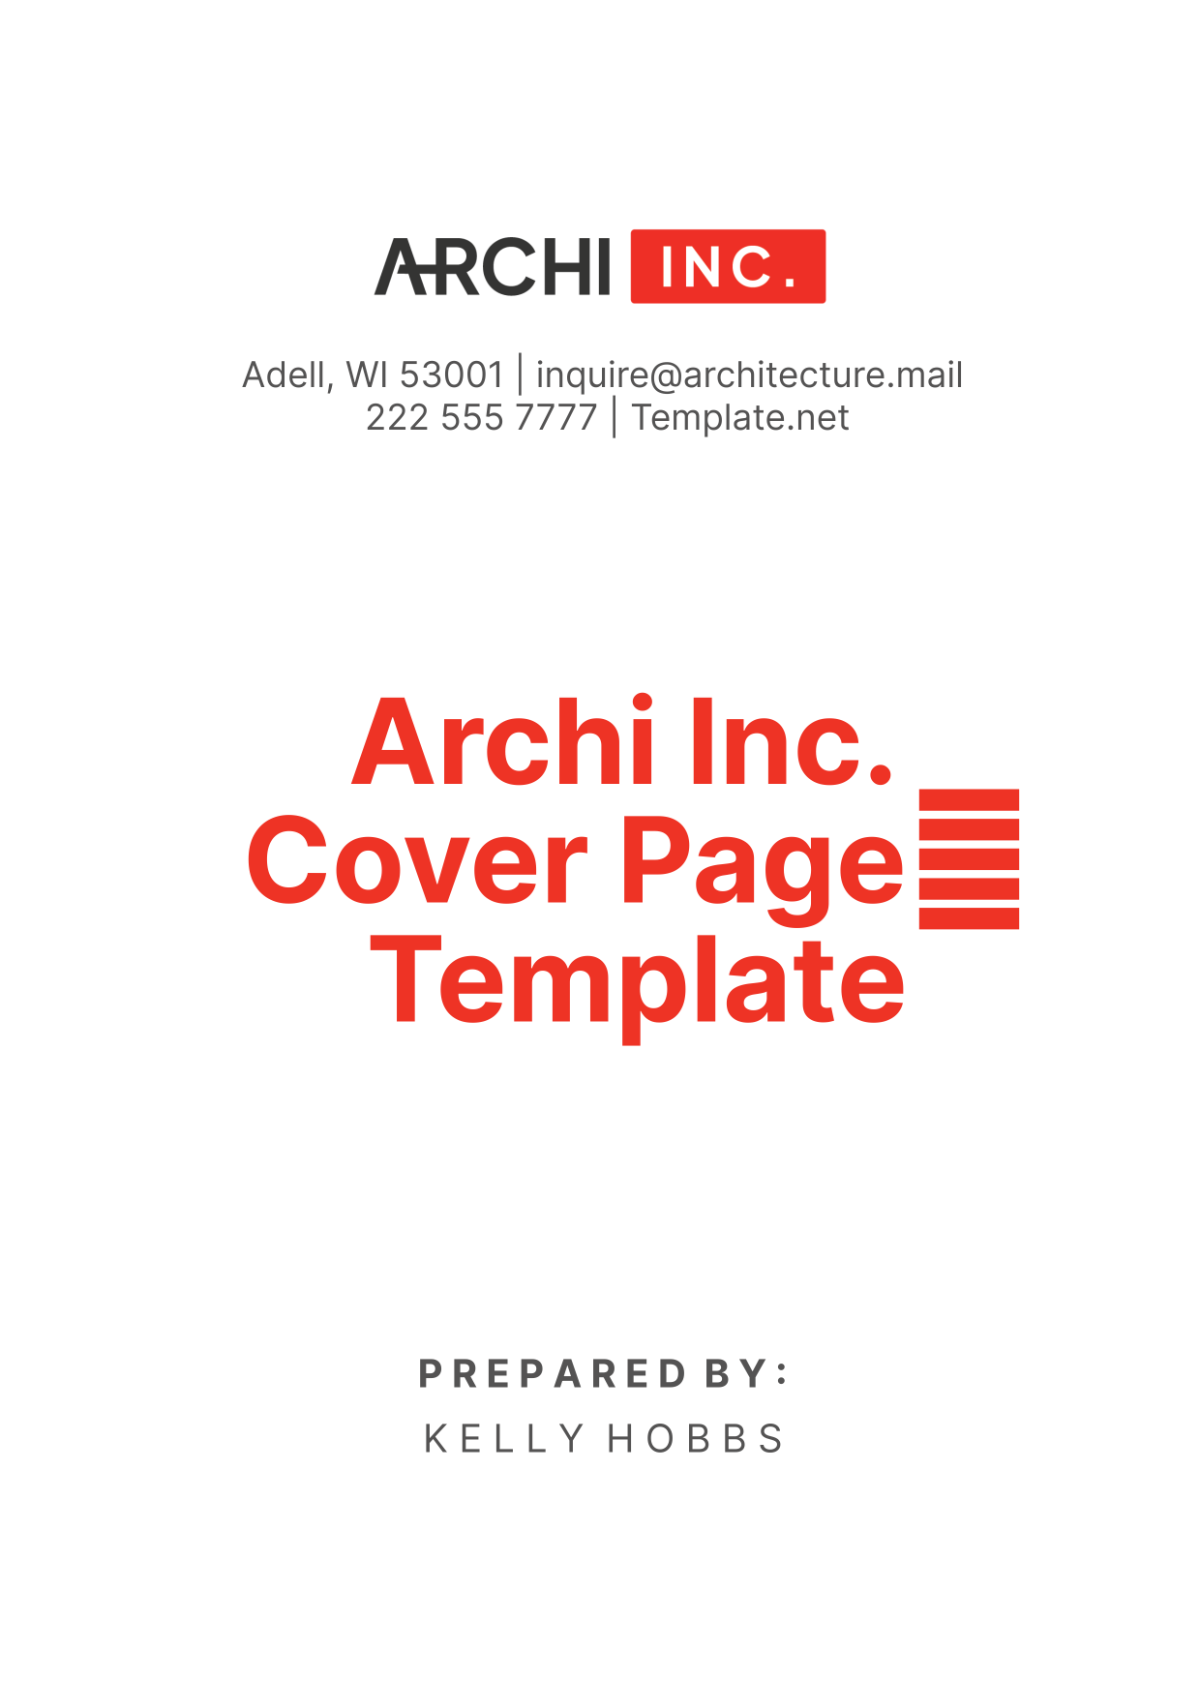 Architecture Cover Page Template